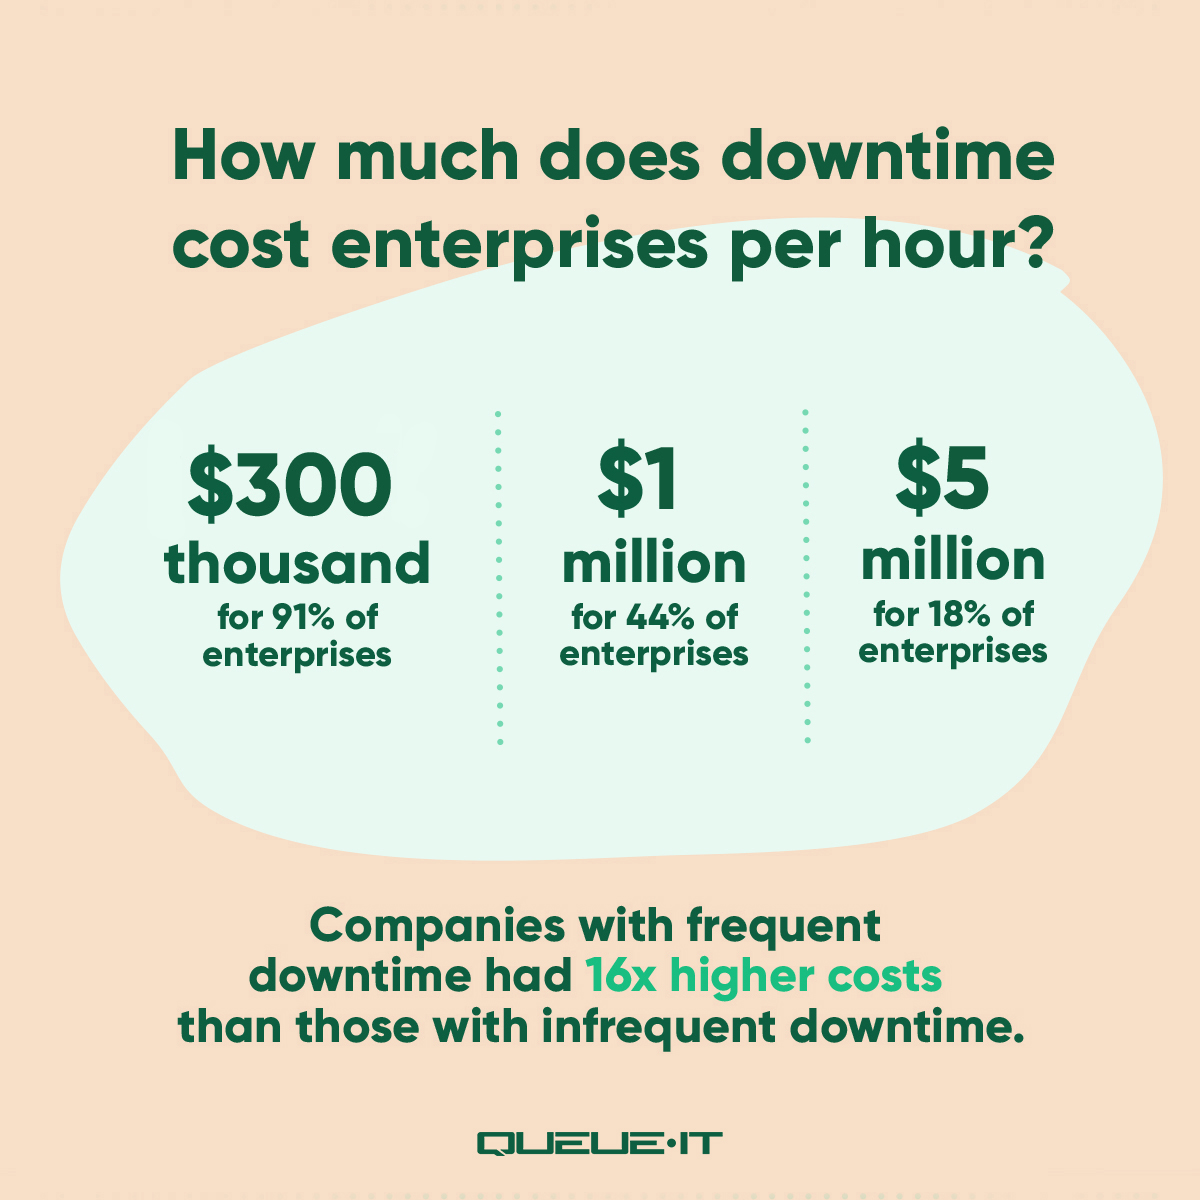 Hourly costs of downtime